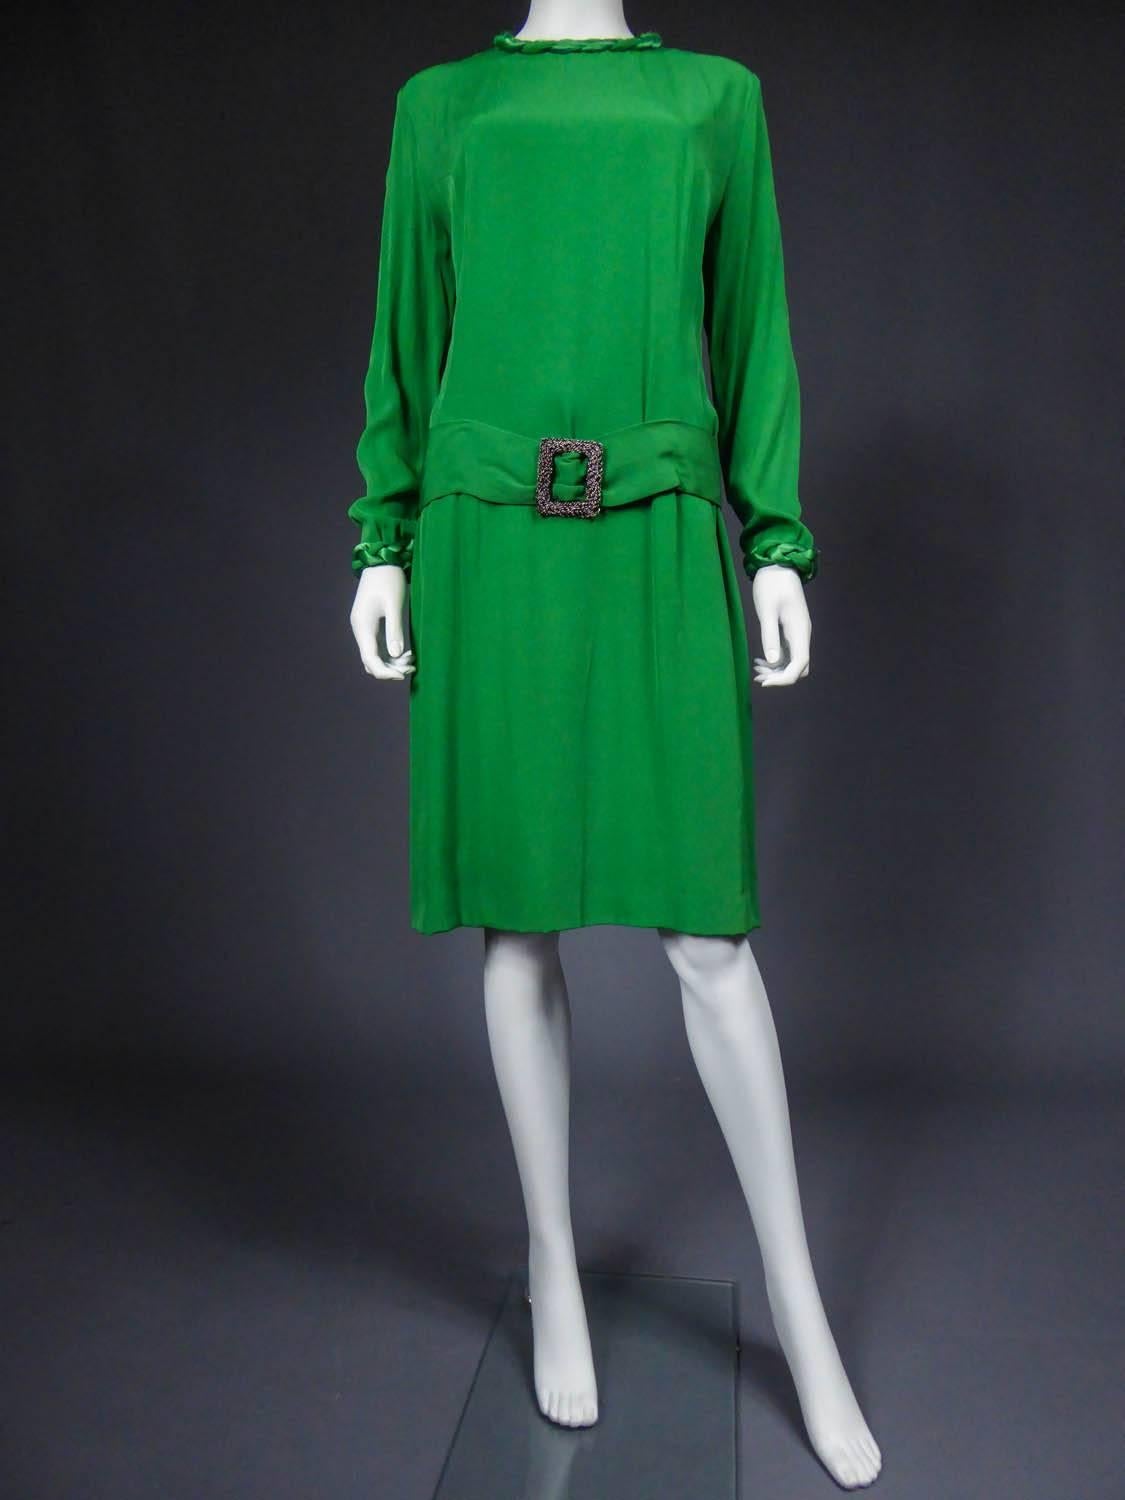 Circa 1940/1960

France

Cocktail dress in emerald green silk ottoman from the 60s. Large matching matt and shiny braids in padded cords at the collar and cuffs. False low-waisted belt with wide buckles in steel chain. Greenish nylon lining. Label